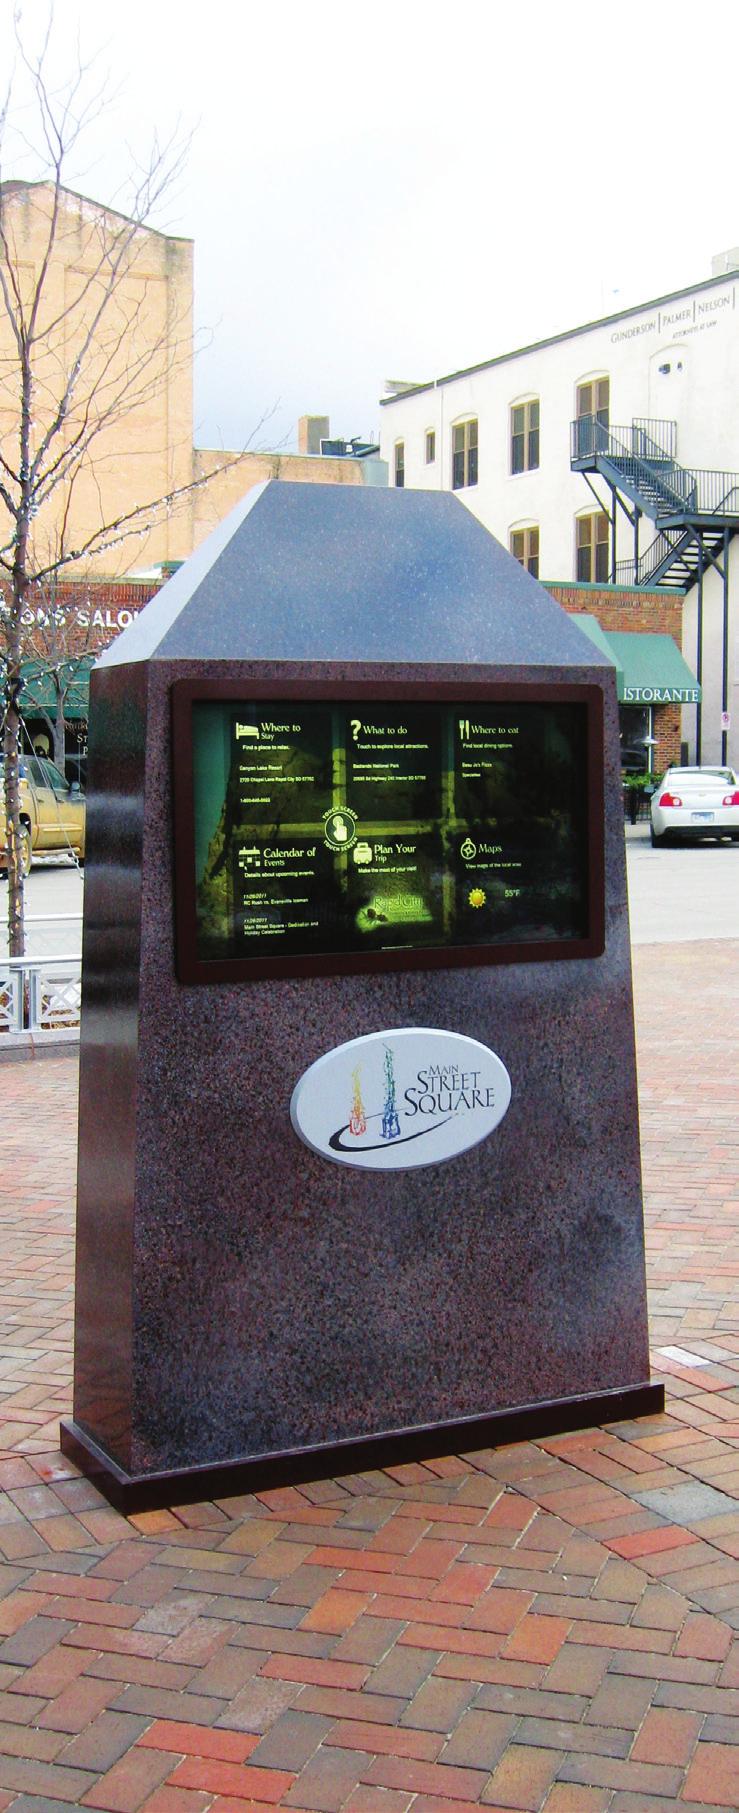 Outdoor Applications Enclosures & Kiosks Save money and make your kiosks more efficient with DynaScan high bright LCDs.